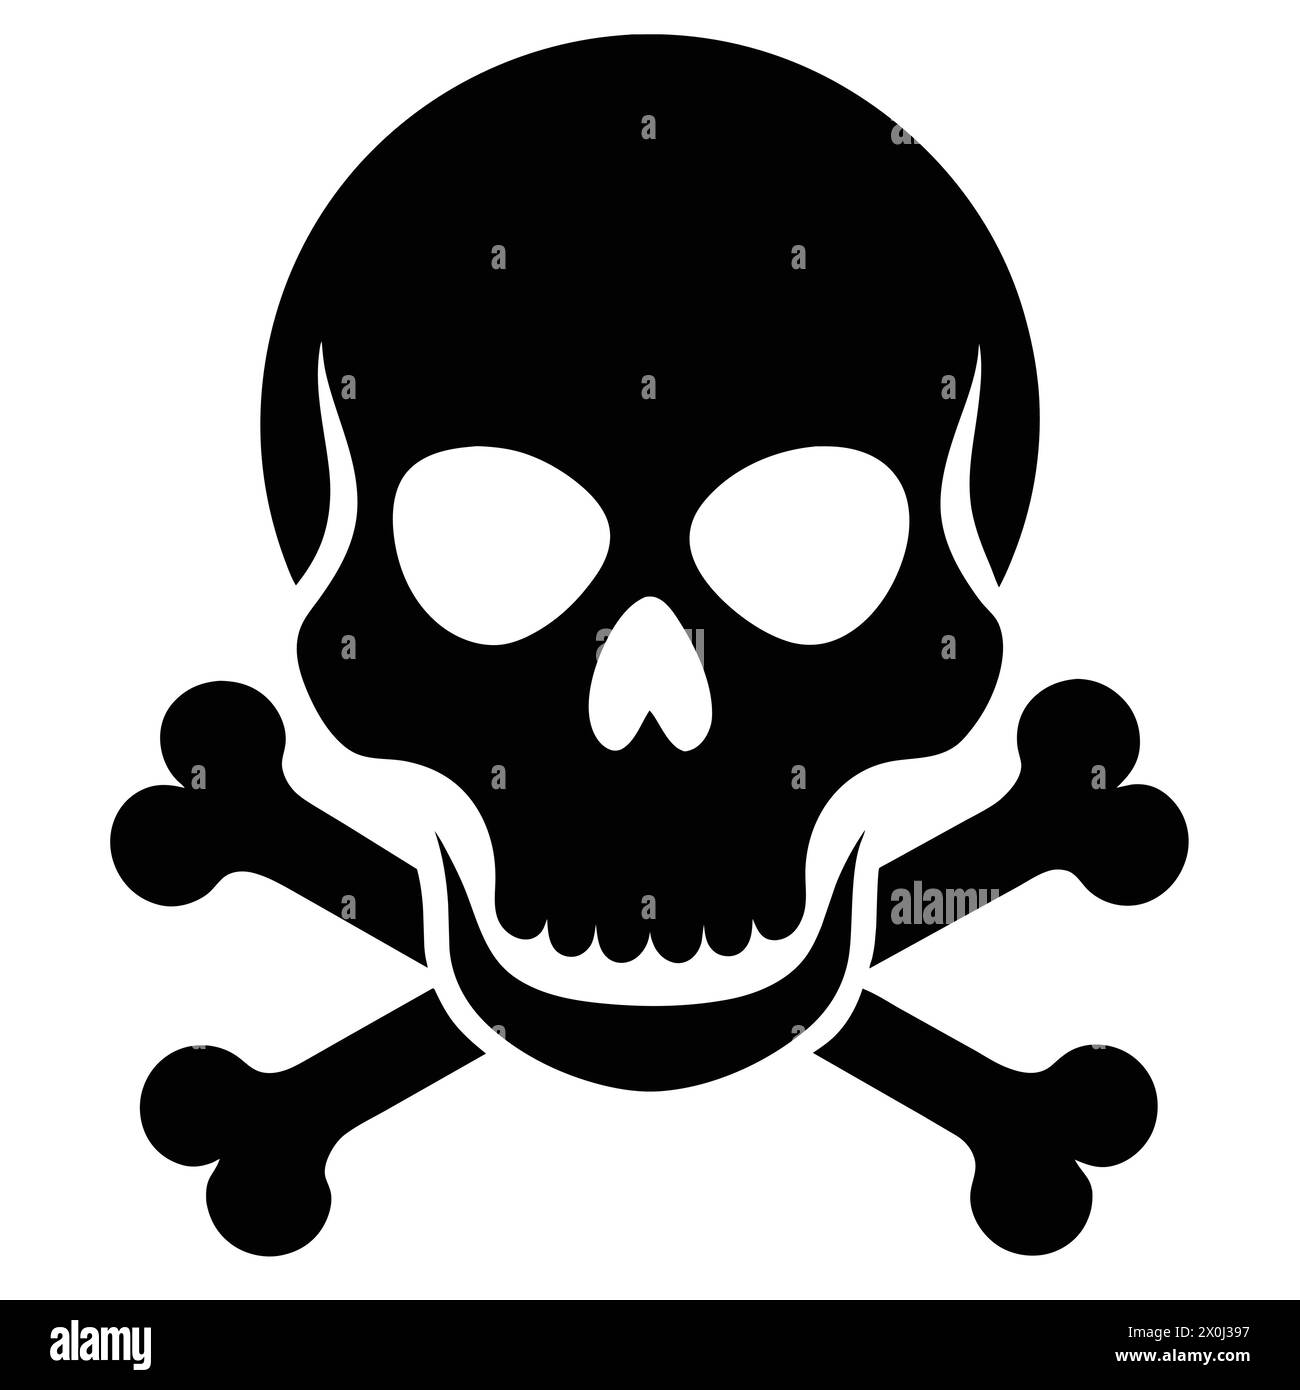 Silhouette of Skull and Bones, perfect for Halloween Decor, Party Invitations, Spooky Themed Events, Tattoo Designs, Gothic Art Prints Stock Vector